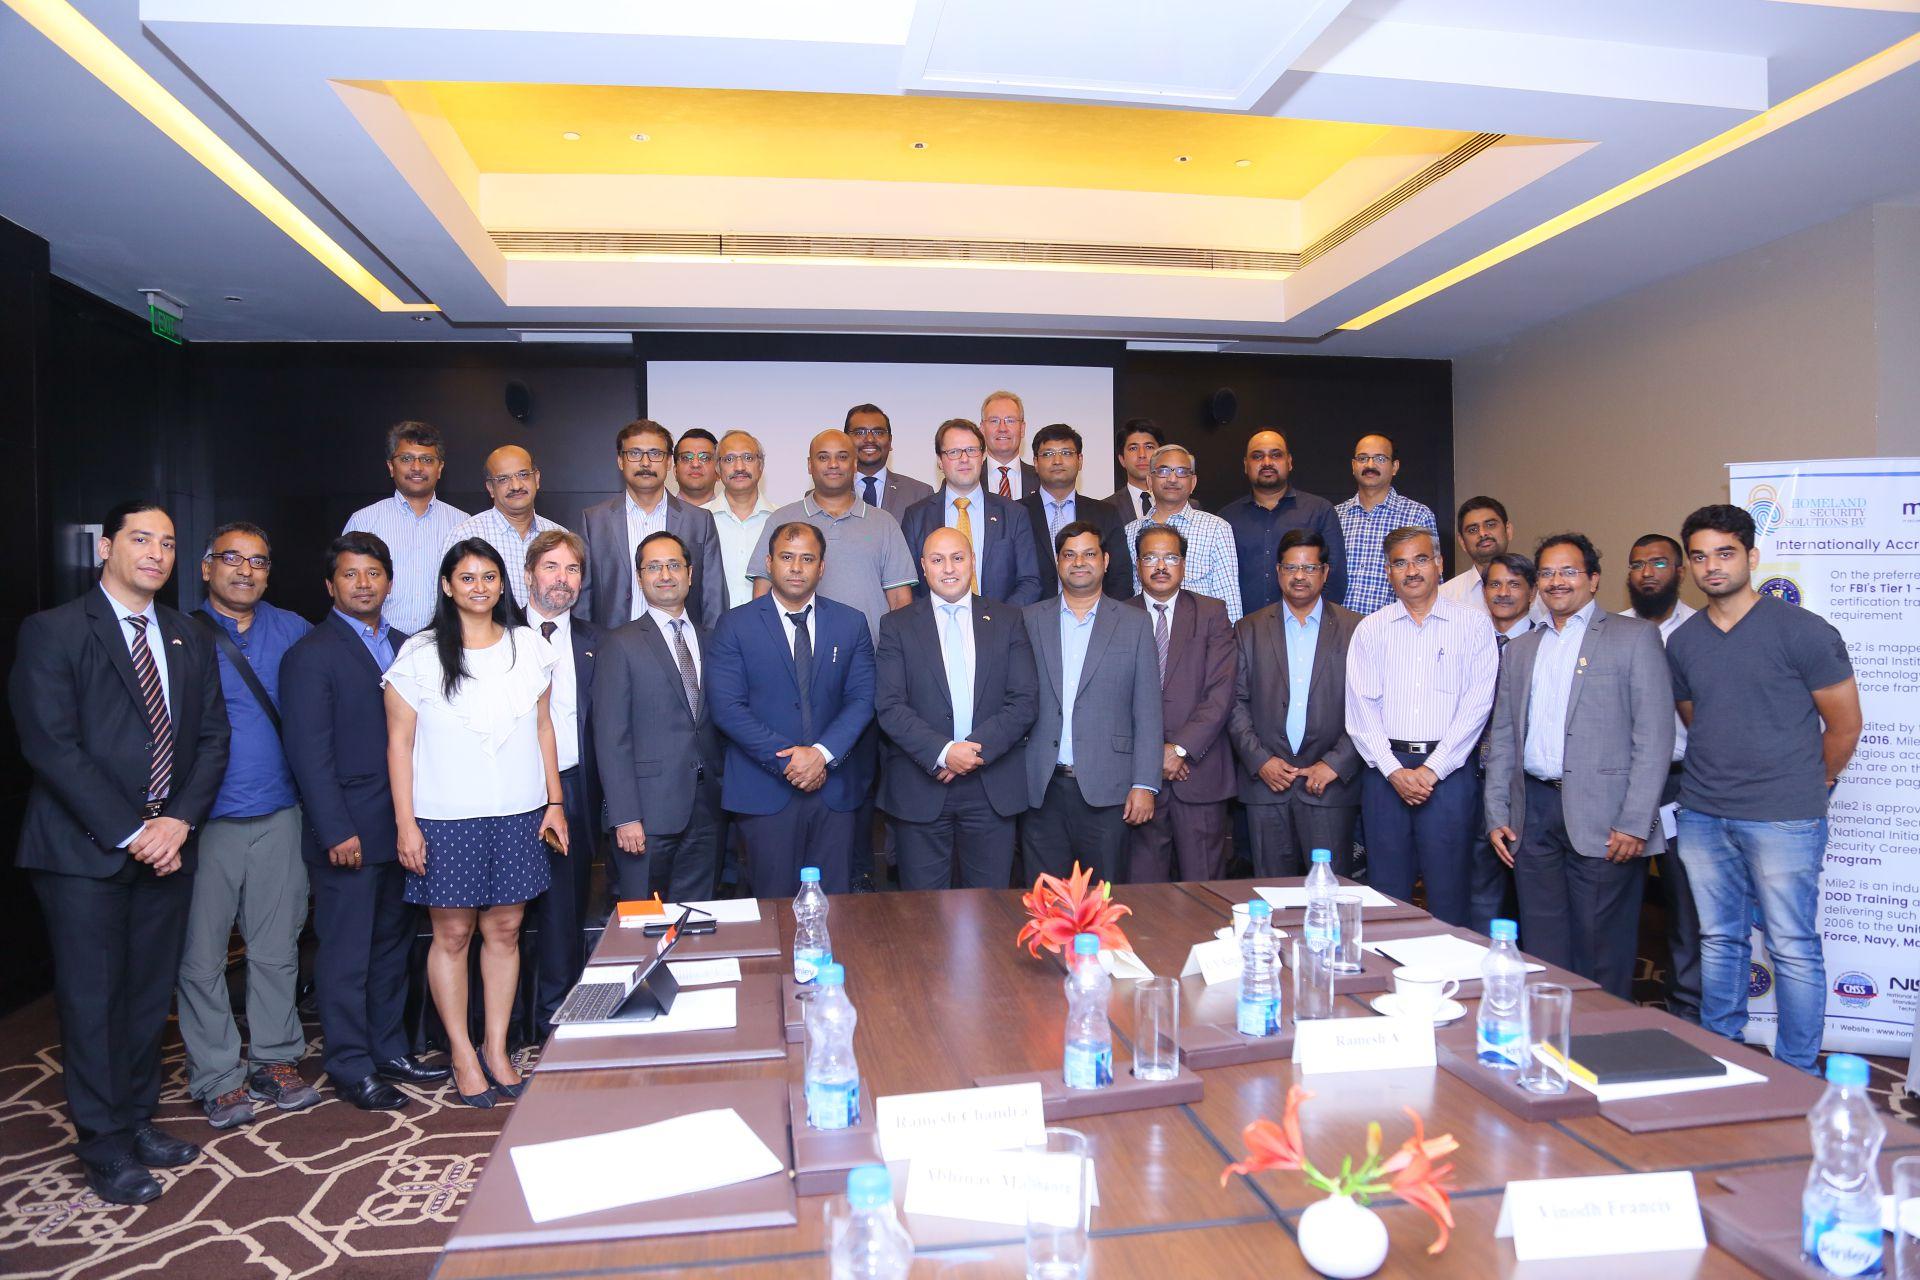 Mission to India Deepening the Allignment NL-India on Cyber Security 